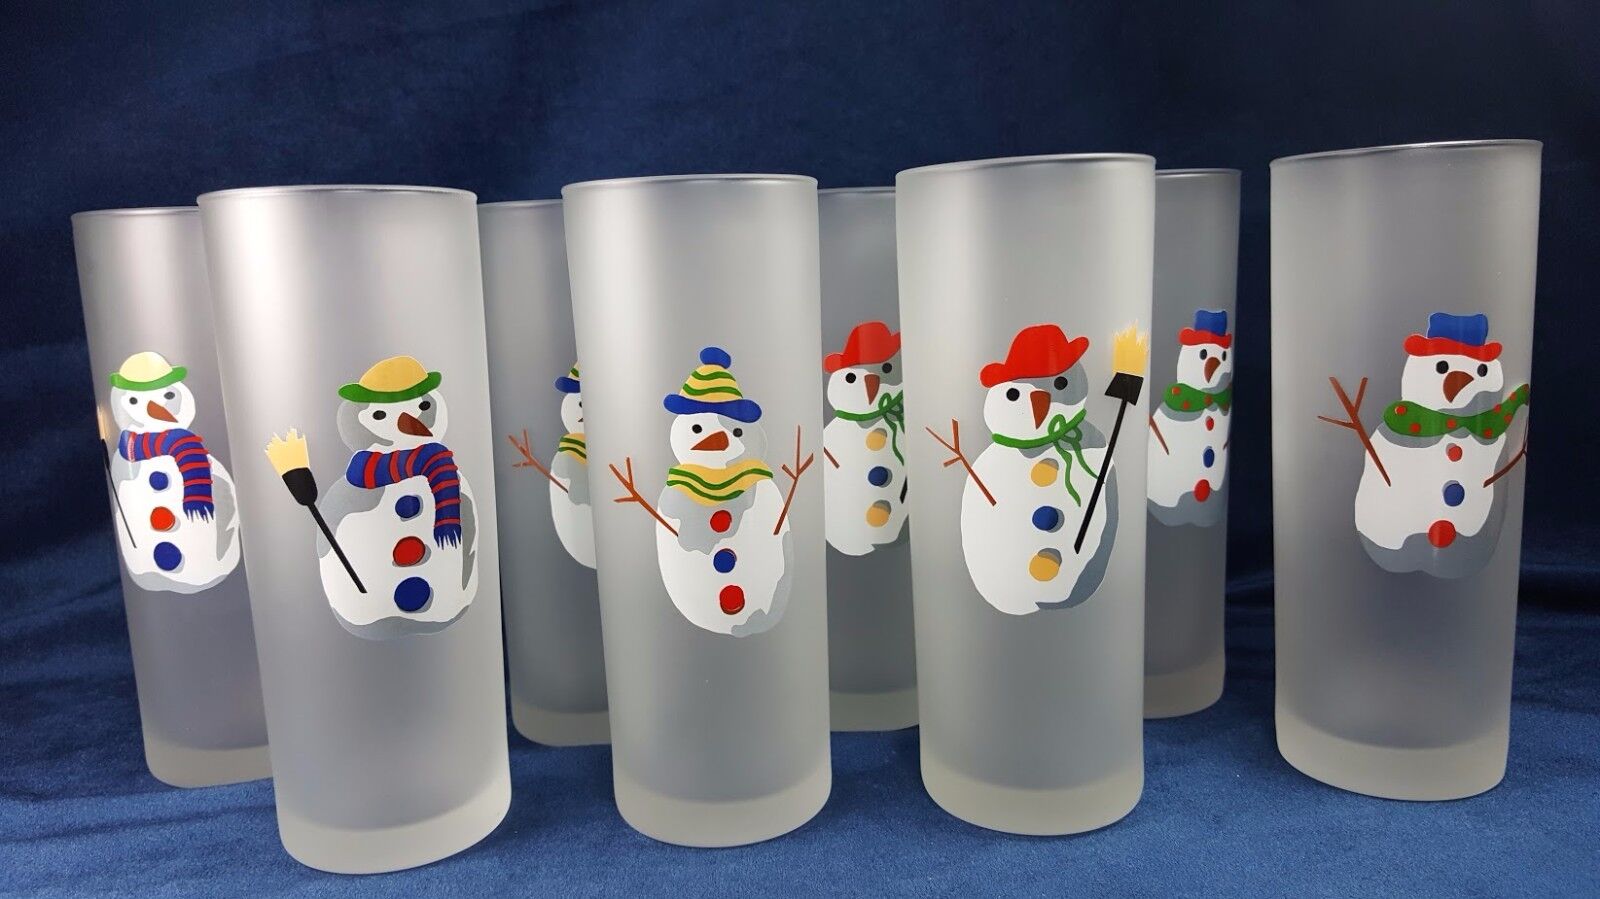 4 DARTINGTON Frosted Highball Holiday Glasses Glassware Tumblers Snowman England